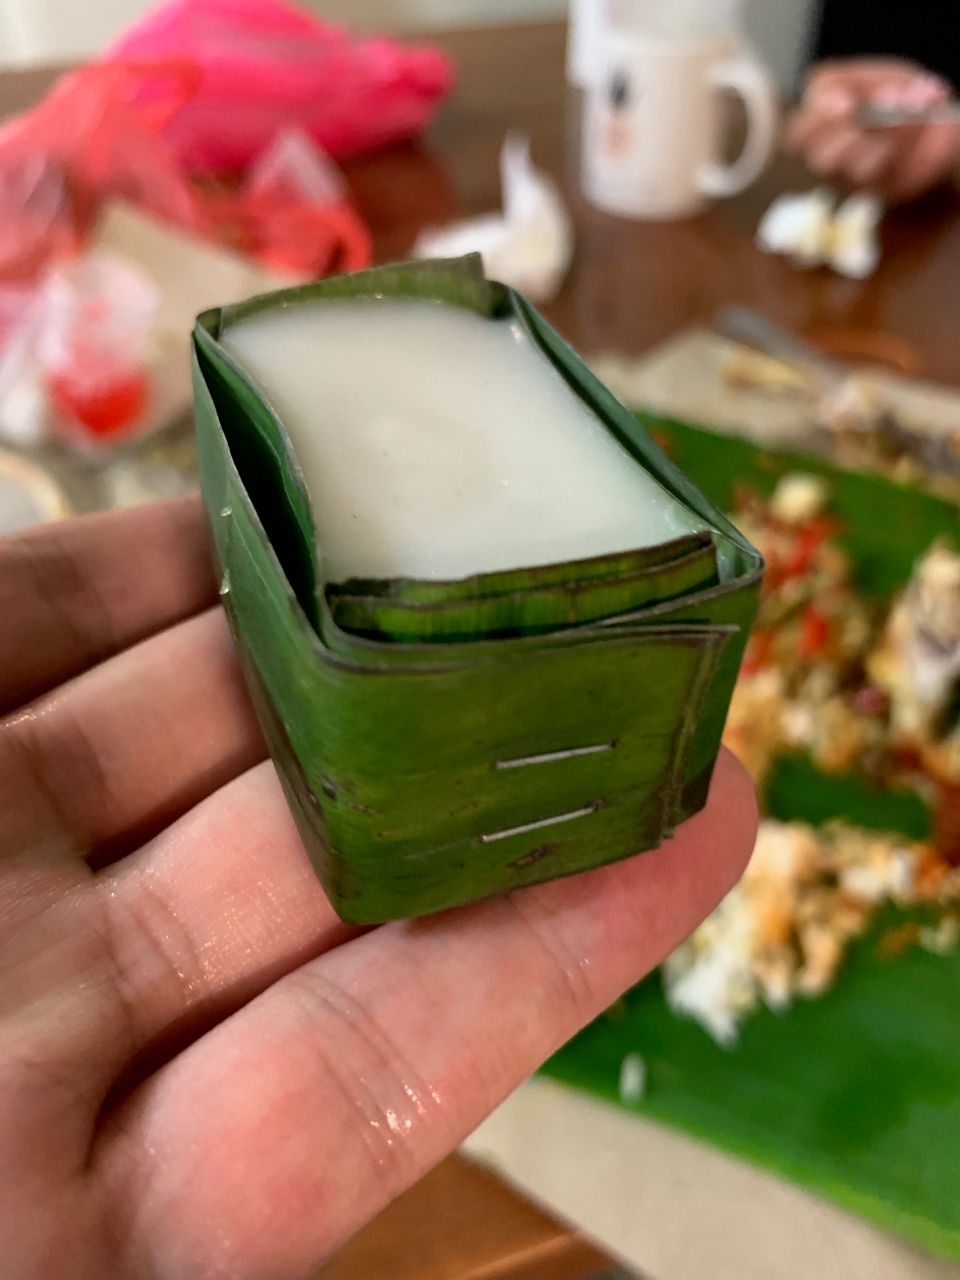 Very environmentally friendly packaging made out of a leaf